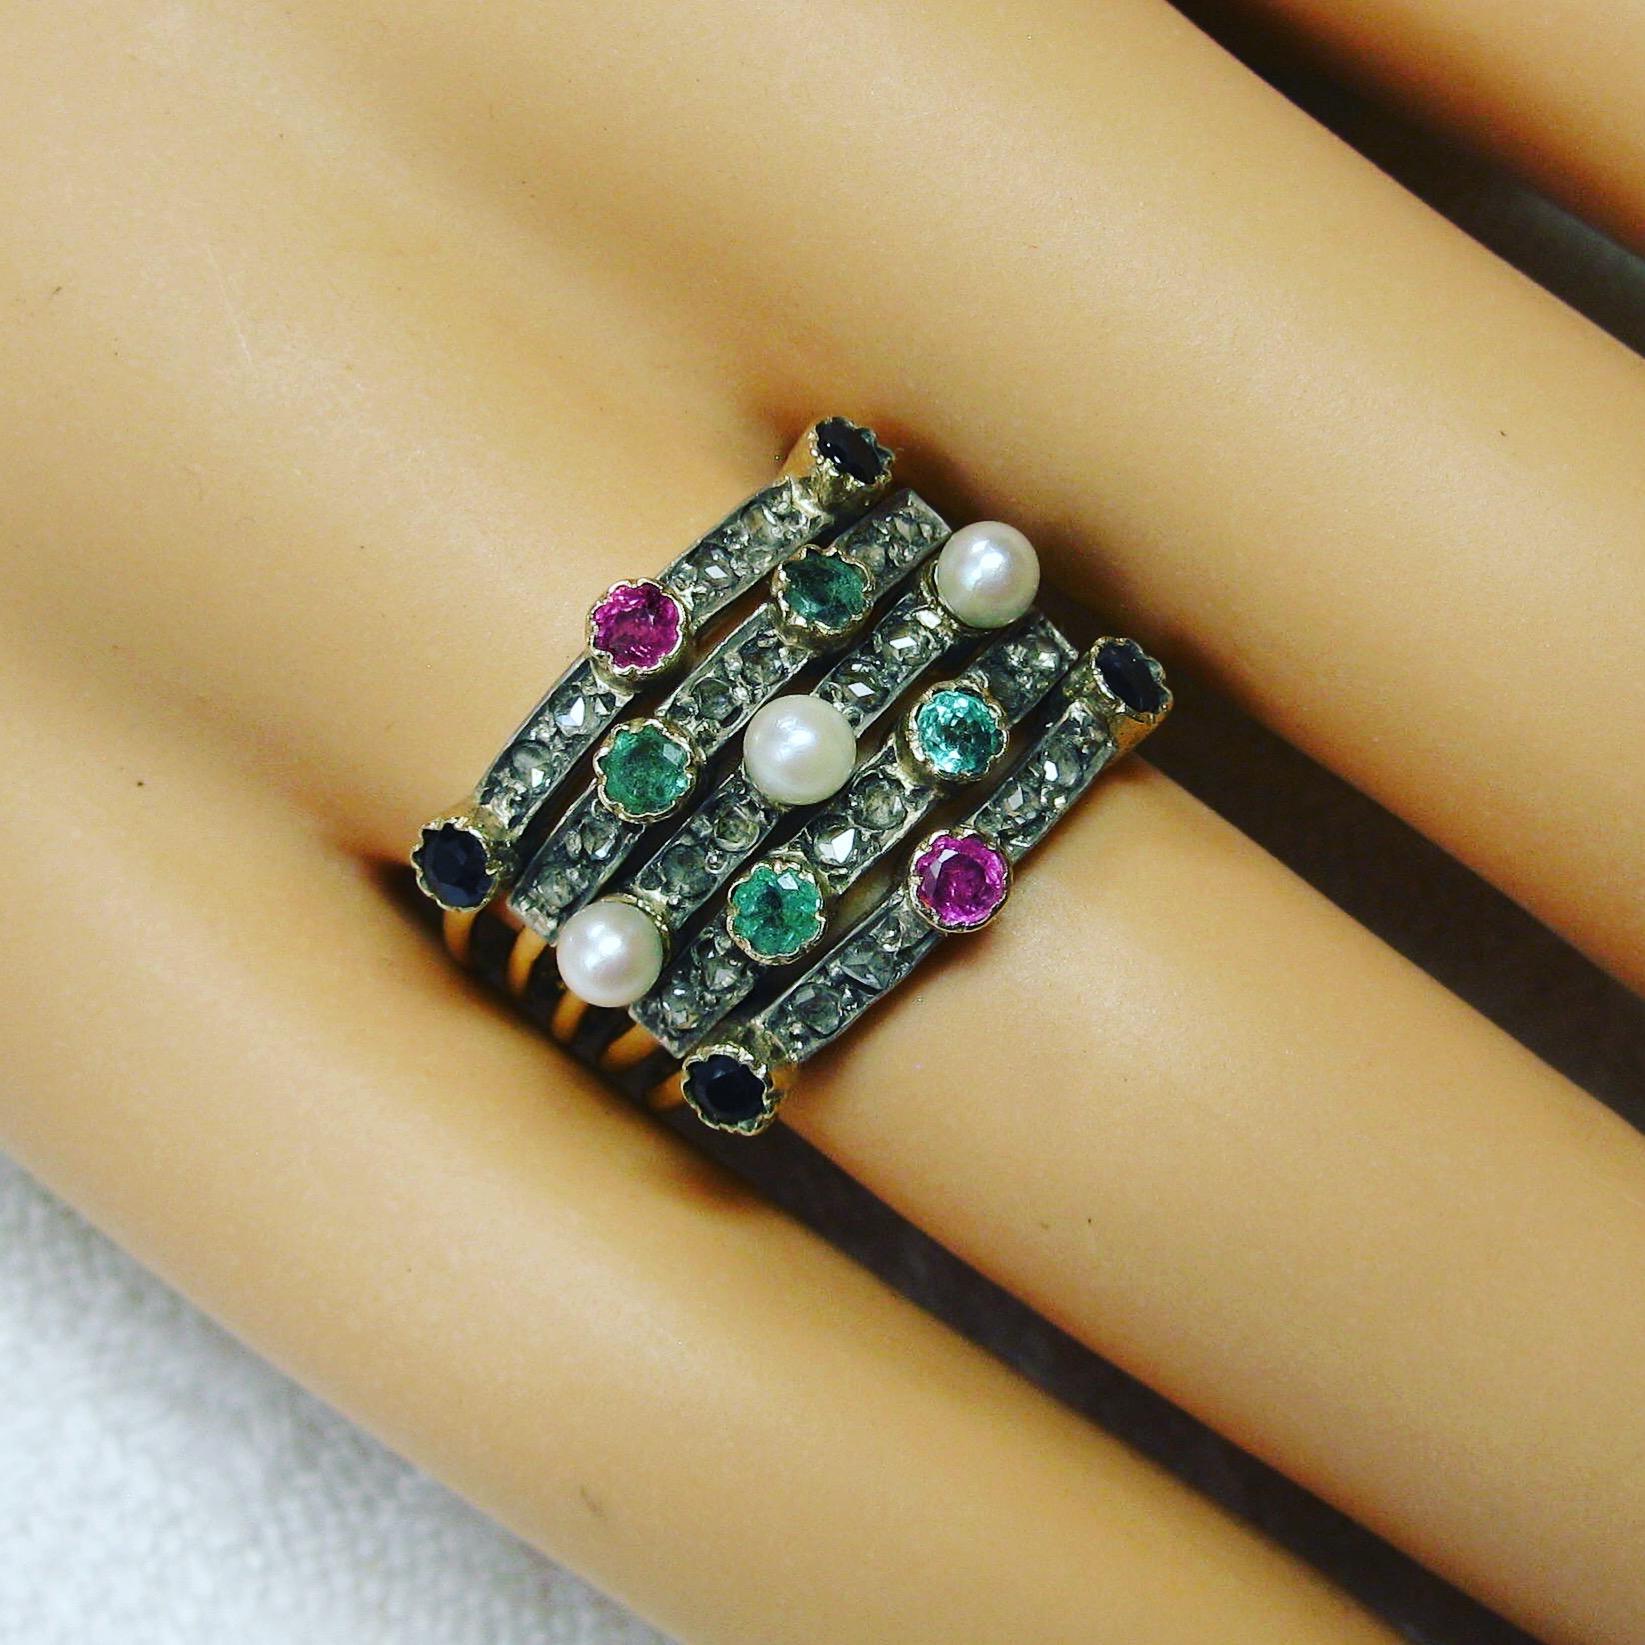 This is a spectacular antique Harem Ring with five stacking bands set with 24 sparkling Rose Cut Diamonds, Emeralds, Sapphires, Rubies and Pearls in 14 Karat Gold.  The ring is a highly desirable and very difficult to find jewel.  The ring dates to